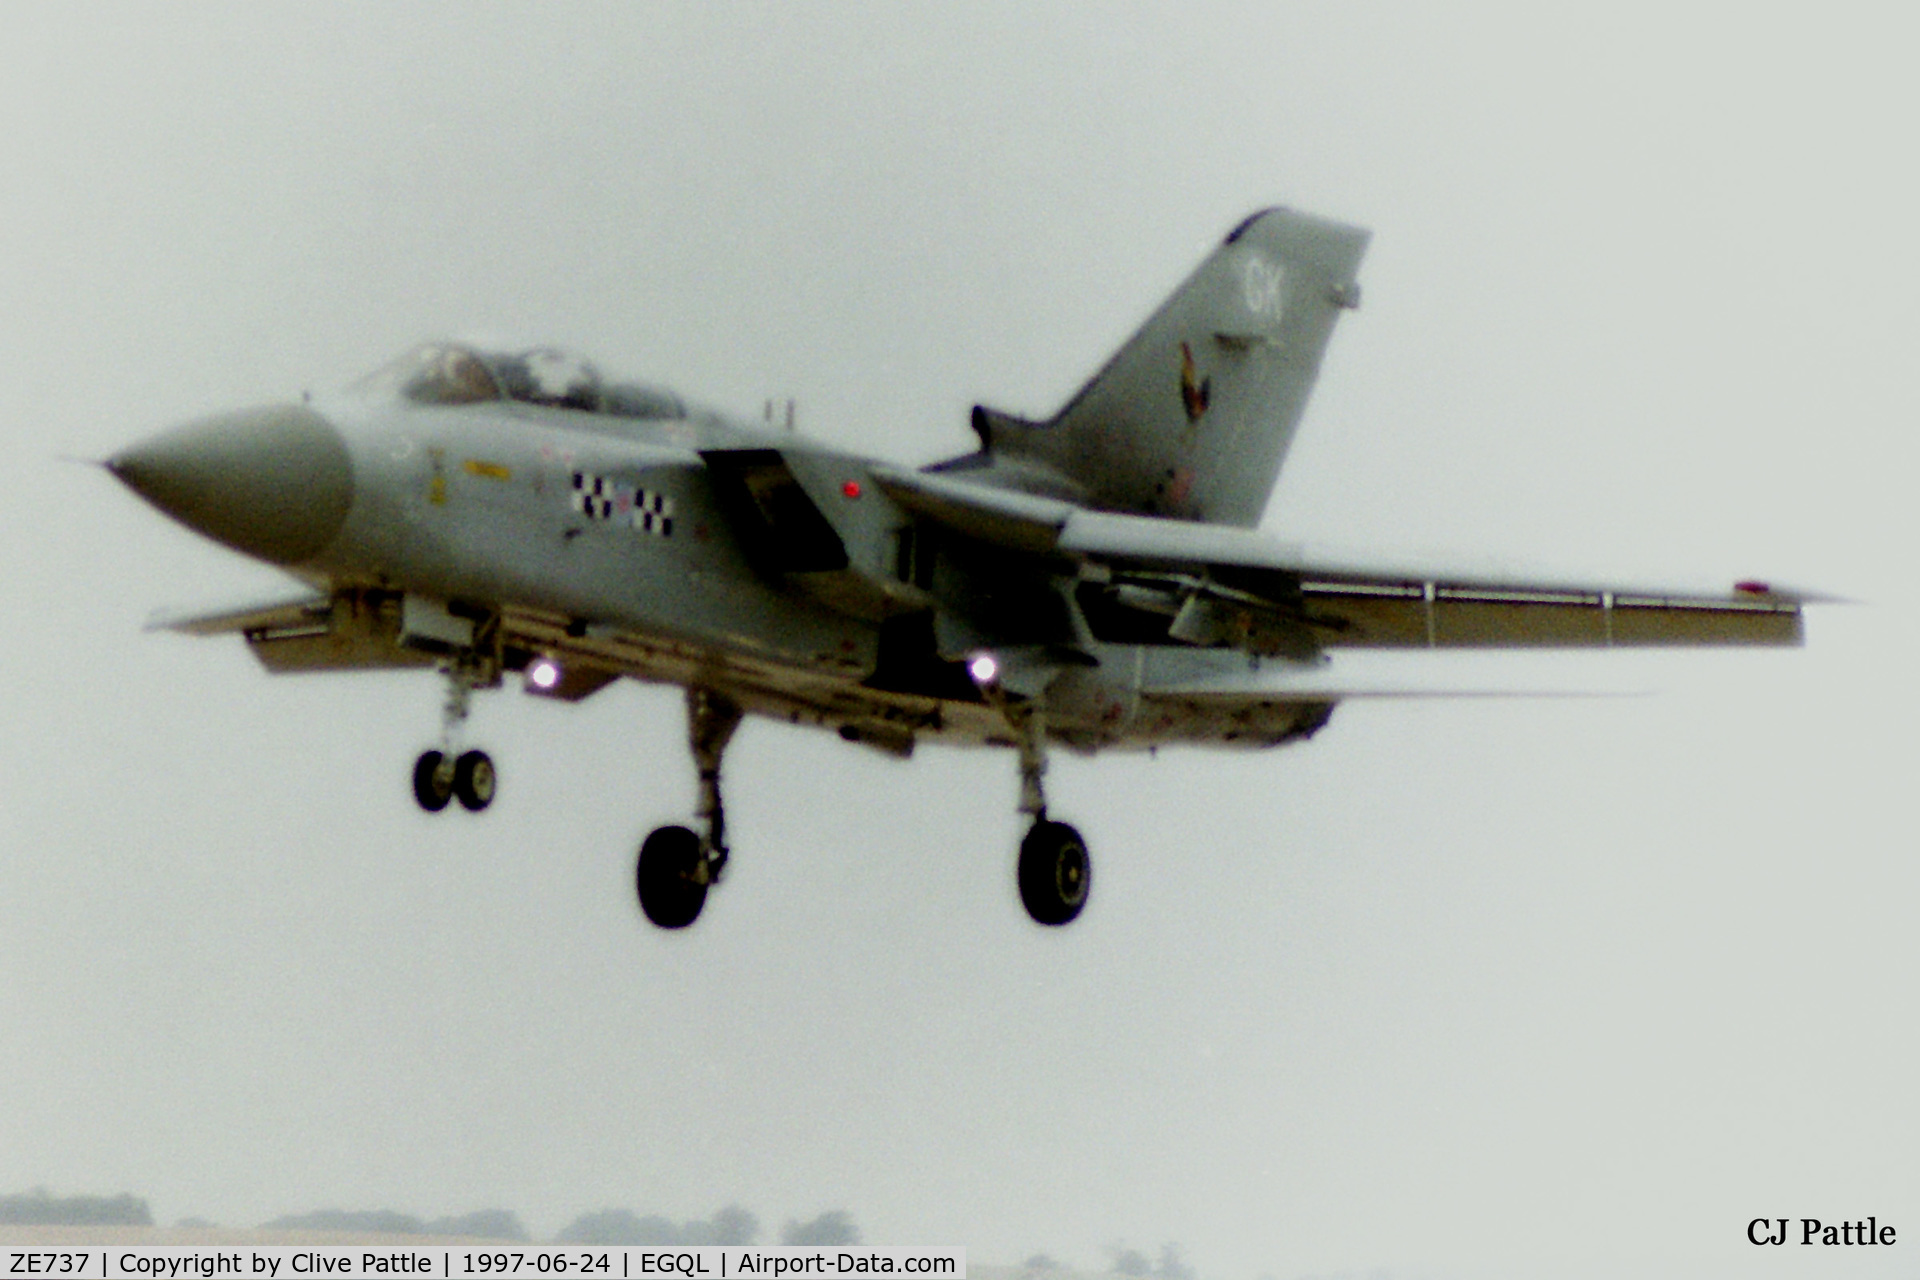 ZE737, 1988 Panavia Tornado F.3 C/N 671/AS052/3299, Landing at RAF Leuchars in June 1997 whilst coded GK with 43 Squadron